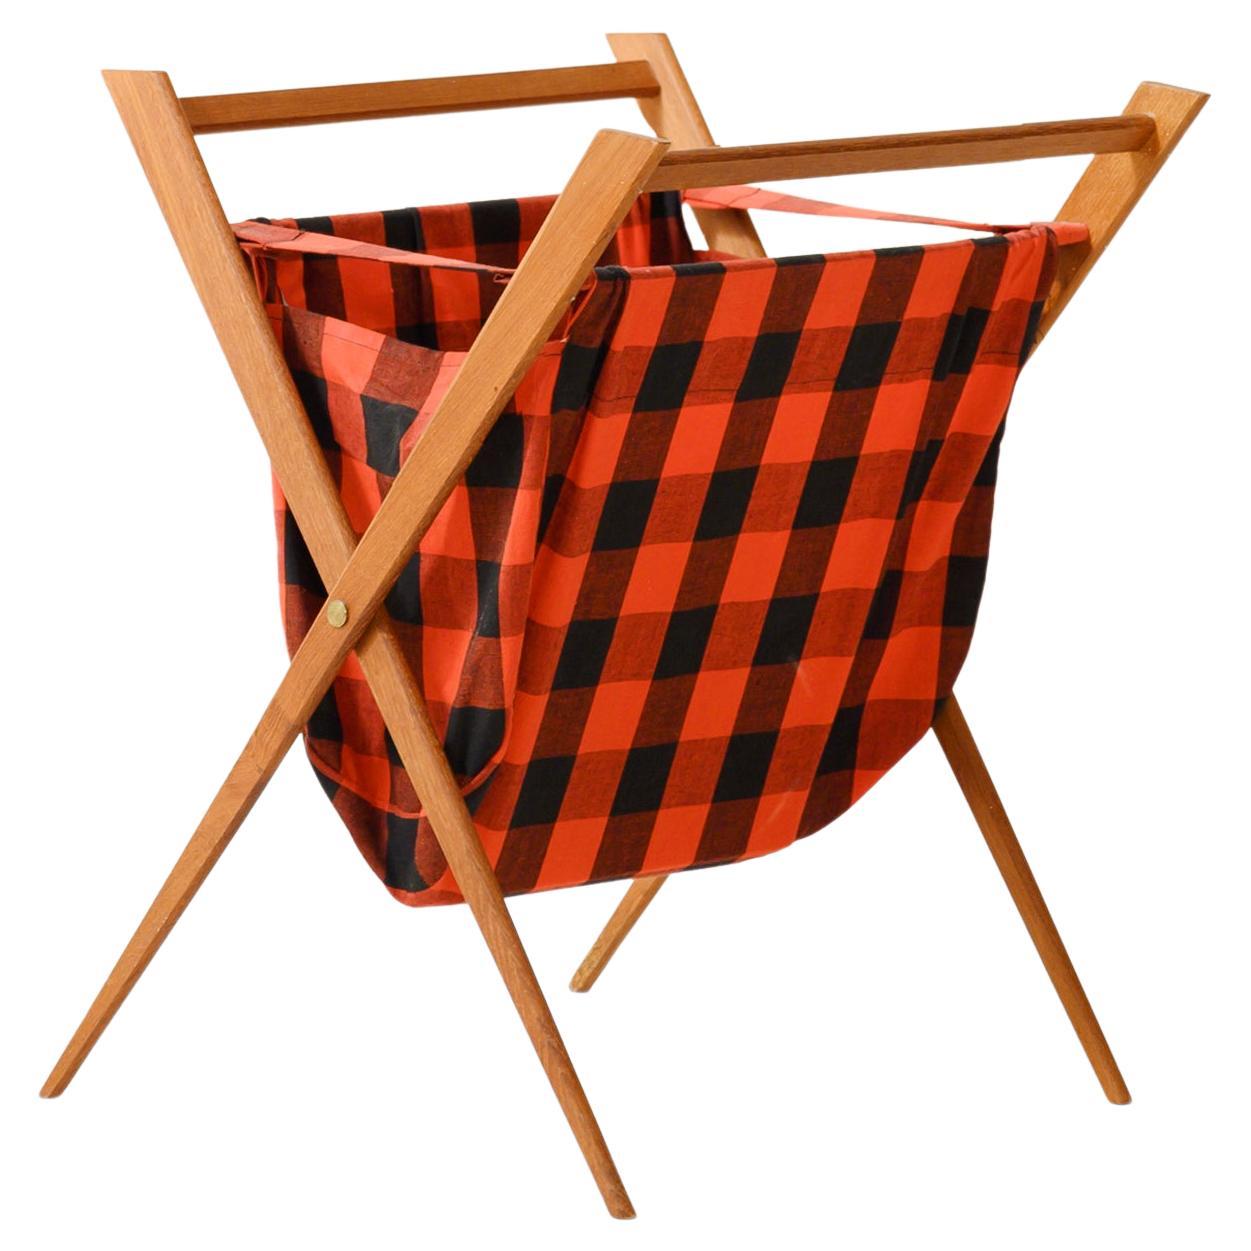 Vintage Teak Magazine Rack from the 1950s For Sale